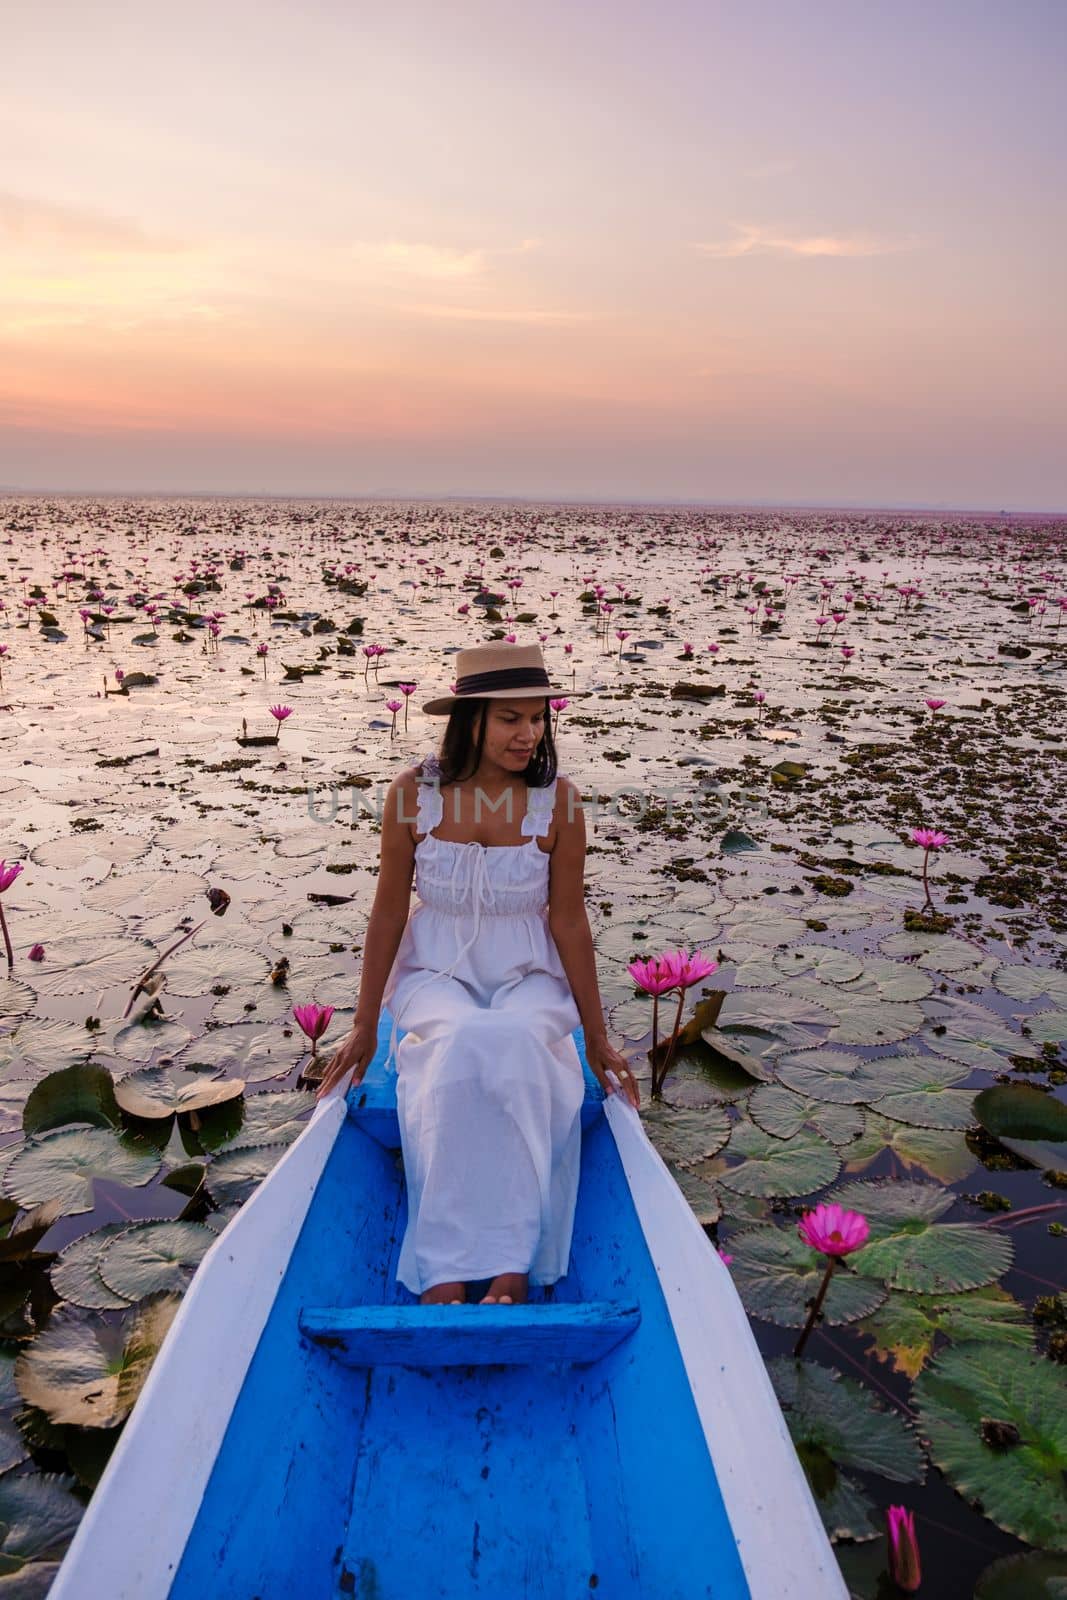 Asian women with a hat in a boat at the Red Lotus Sea full of pink flowers in Udon Thani Thailand. by fokkebok